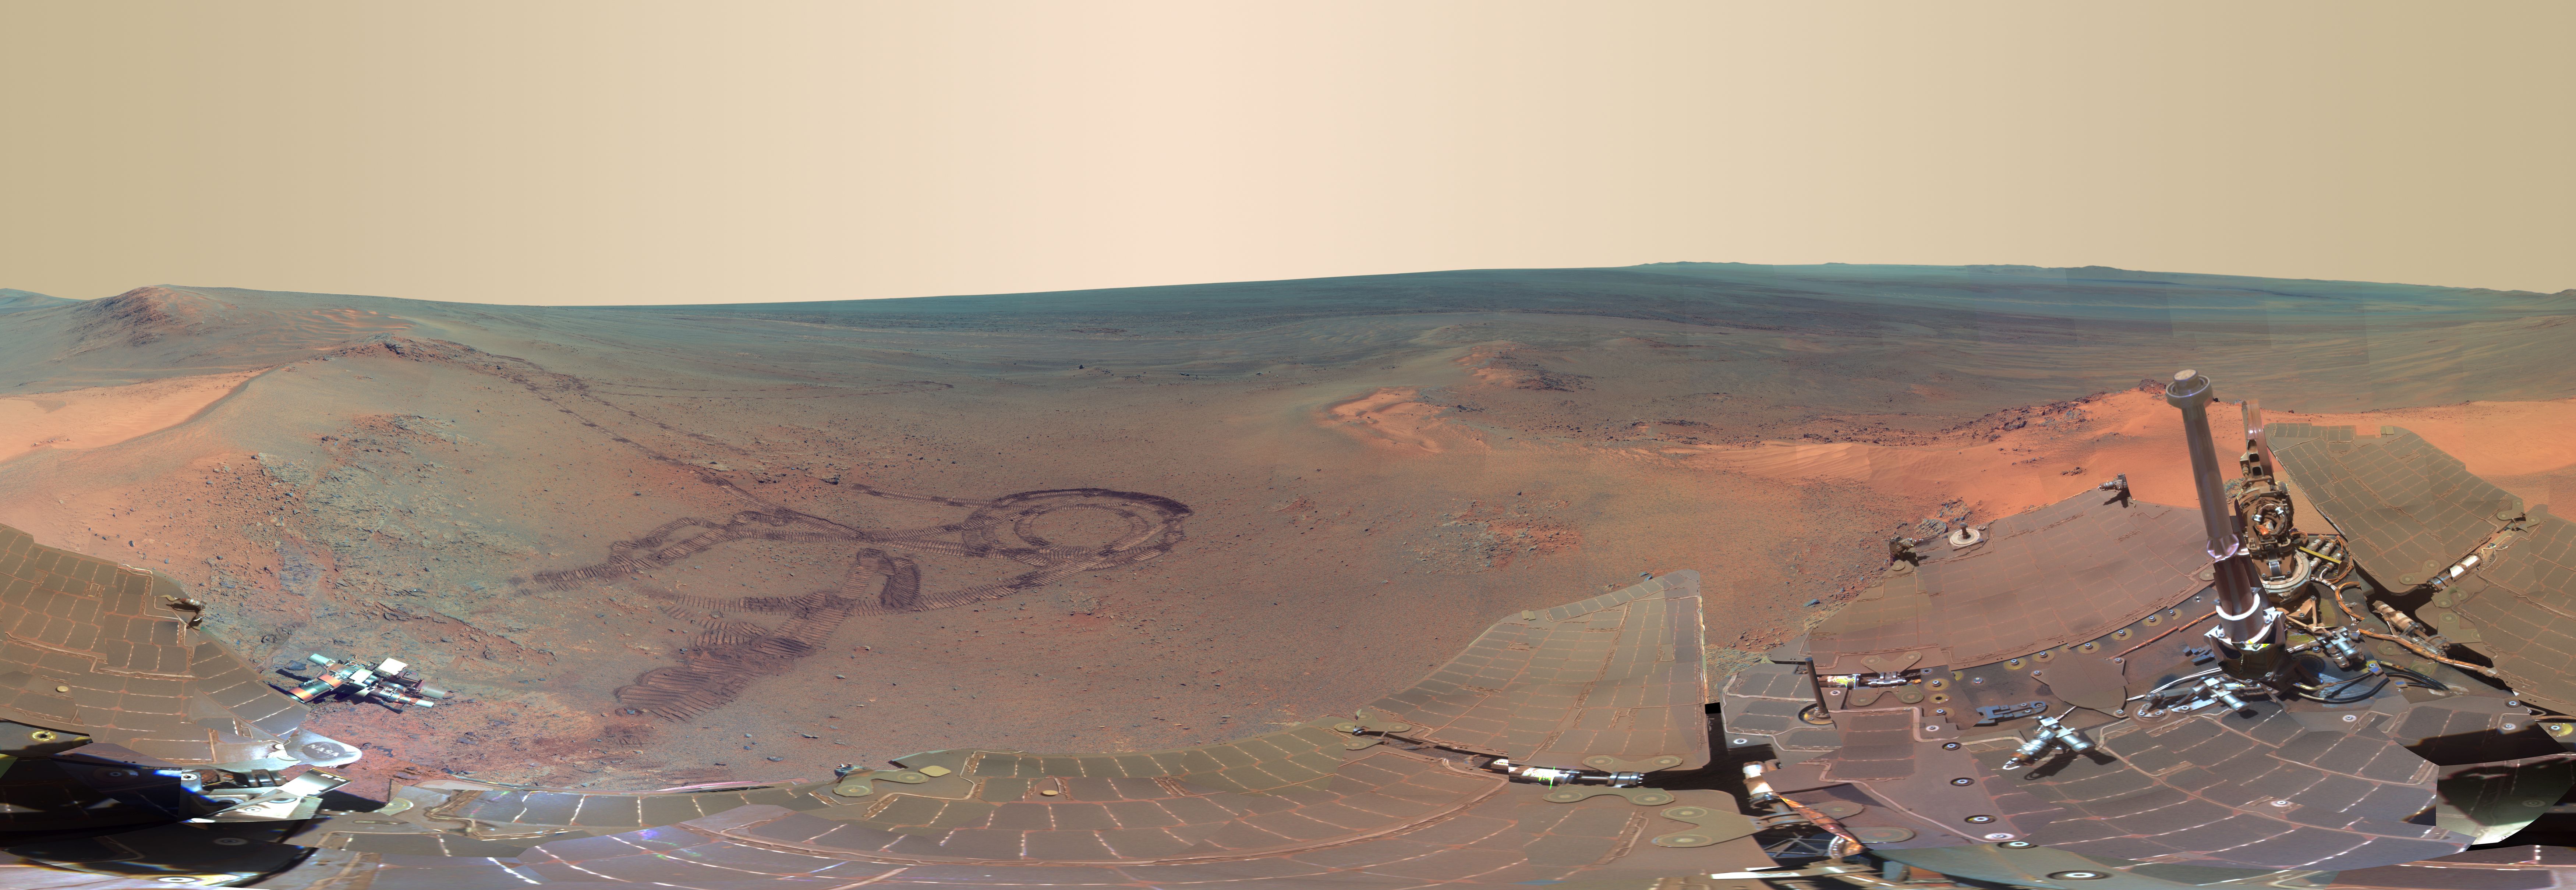 Super Hi Res Mars Rover Panorama Photo Is The Next Best Thing To